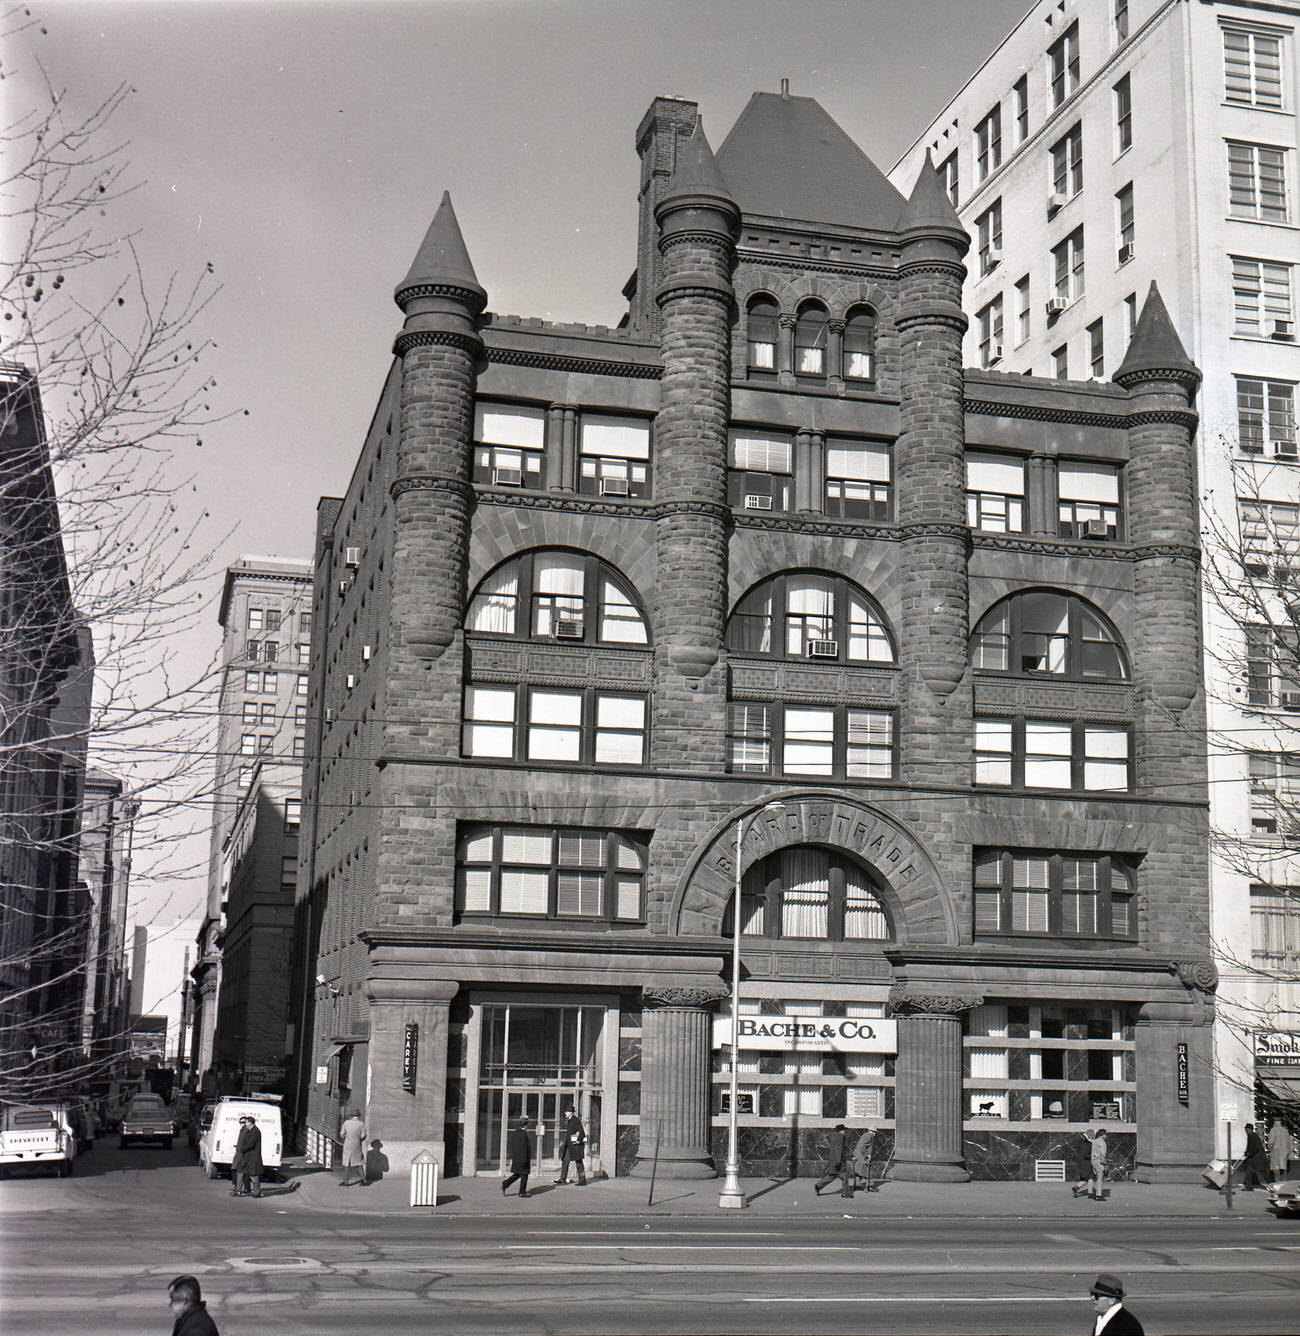 Columbus Board of Trade and Chamber of Commerce building, completed July 1889, demolished in 1969, now site of James A. Rhodes State Office Tower, 1969.